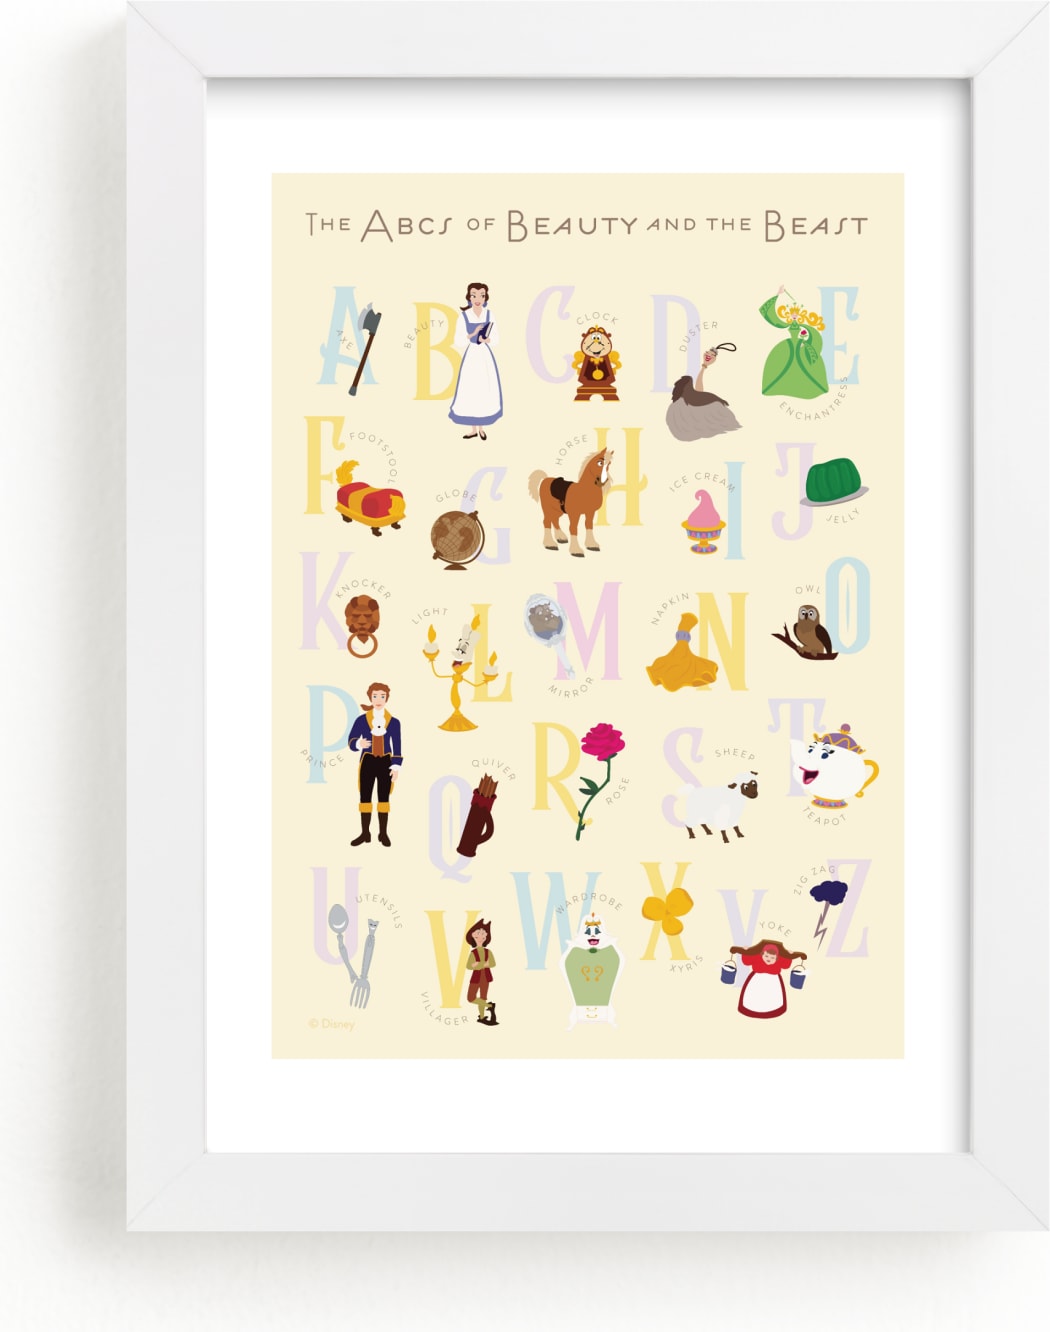 This is a colorful disney art by Christie Kelly called The ABCs of Disney's Beauty and the Beast.